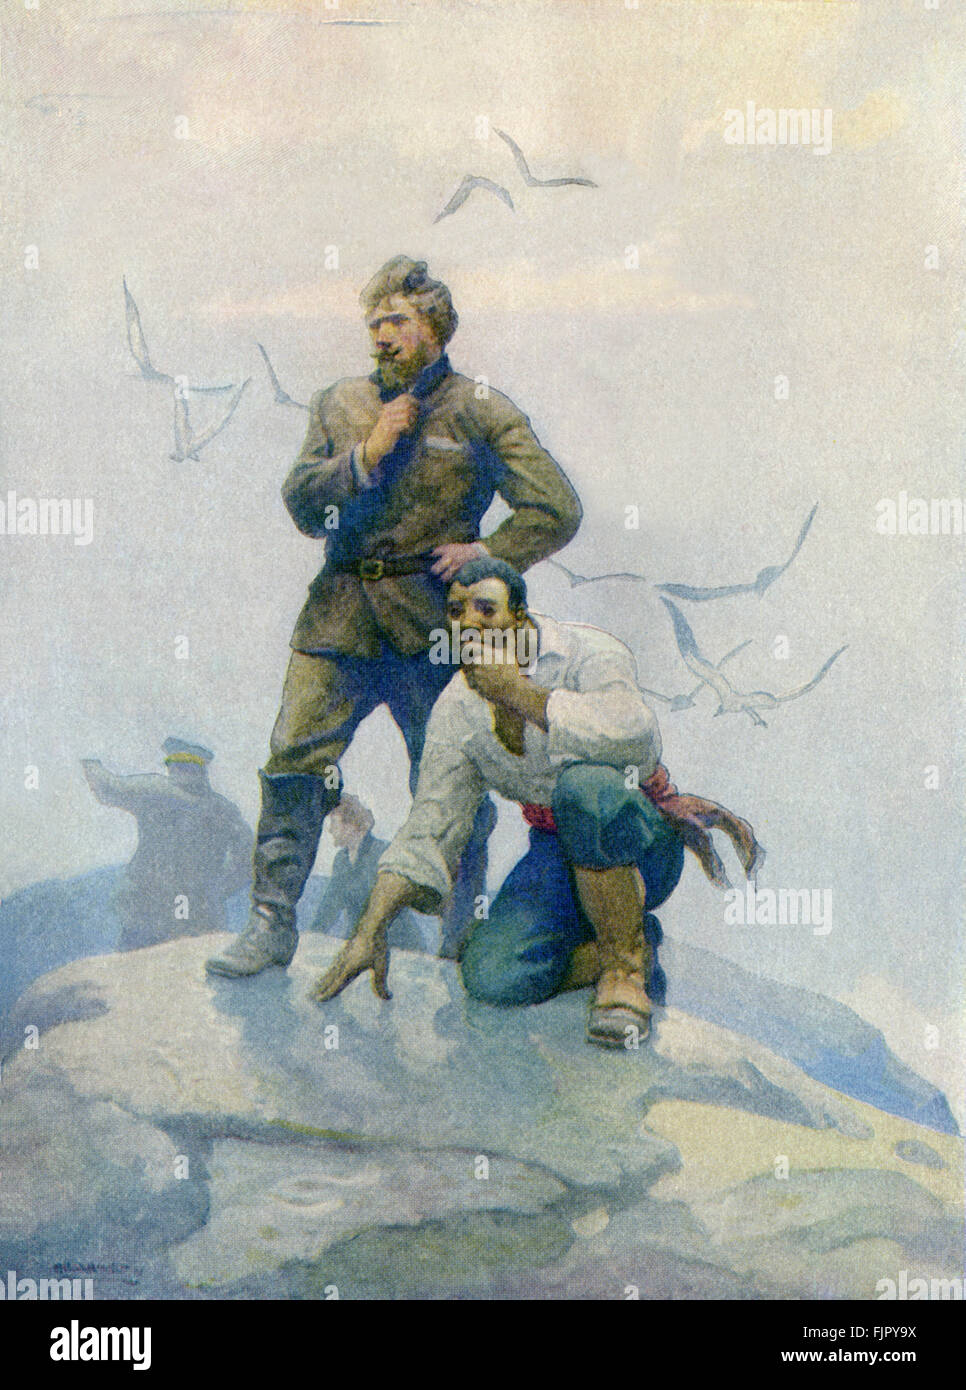 The Mysterious Island by Jules Verne . Illustrations by NC Wyeth. First published 1874. Caption reads: 'The castaways await the lifting of the fog..While the gaze of the reporter and Neb were cast upon the ocean, the sailor and Hebert looked eagerly for the cost in the west..'    JV French novelist 8 February 1828 – 24 March 1905. NCW: 1882-1945.   (the adventures of five Americans on an uncharted island in the South Pacific. During the American Civil War, five northern prisoners of war decide to escape, during the siege of Richmond, Virginia) Stock Photo